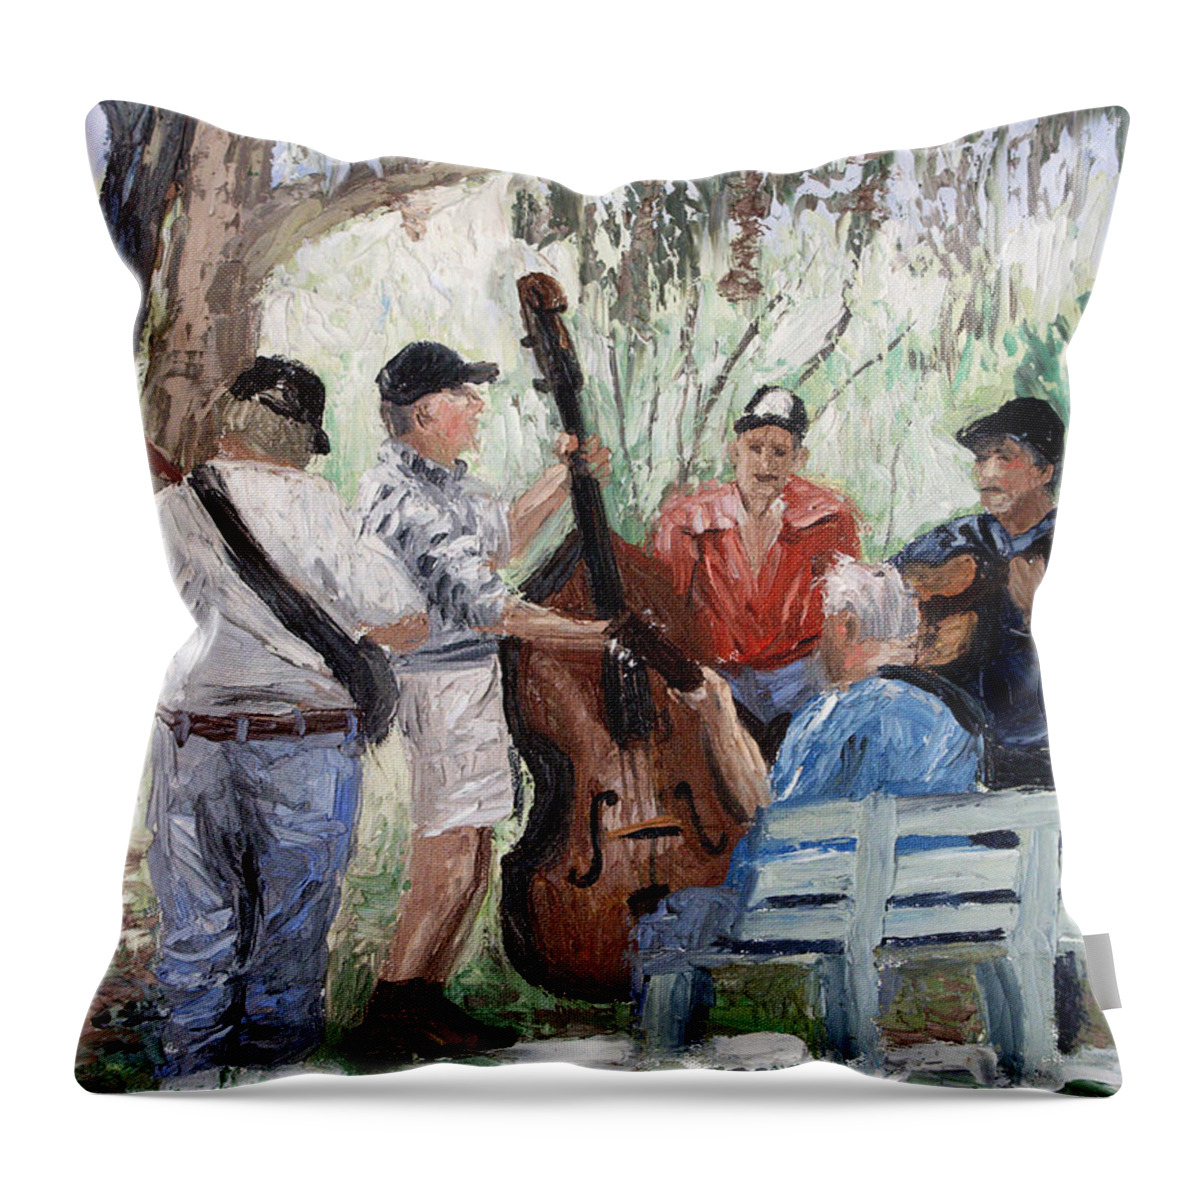 Bluegrass In The Park Framed Prints Throw Pillow featuring the painting Bluegrass In The Park by Anthony Falbo